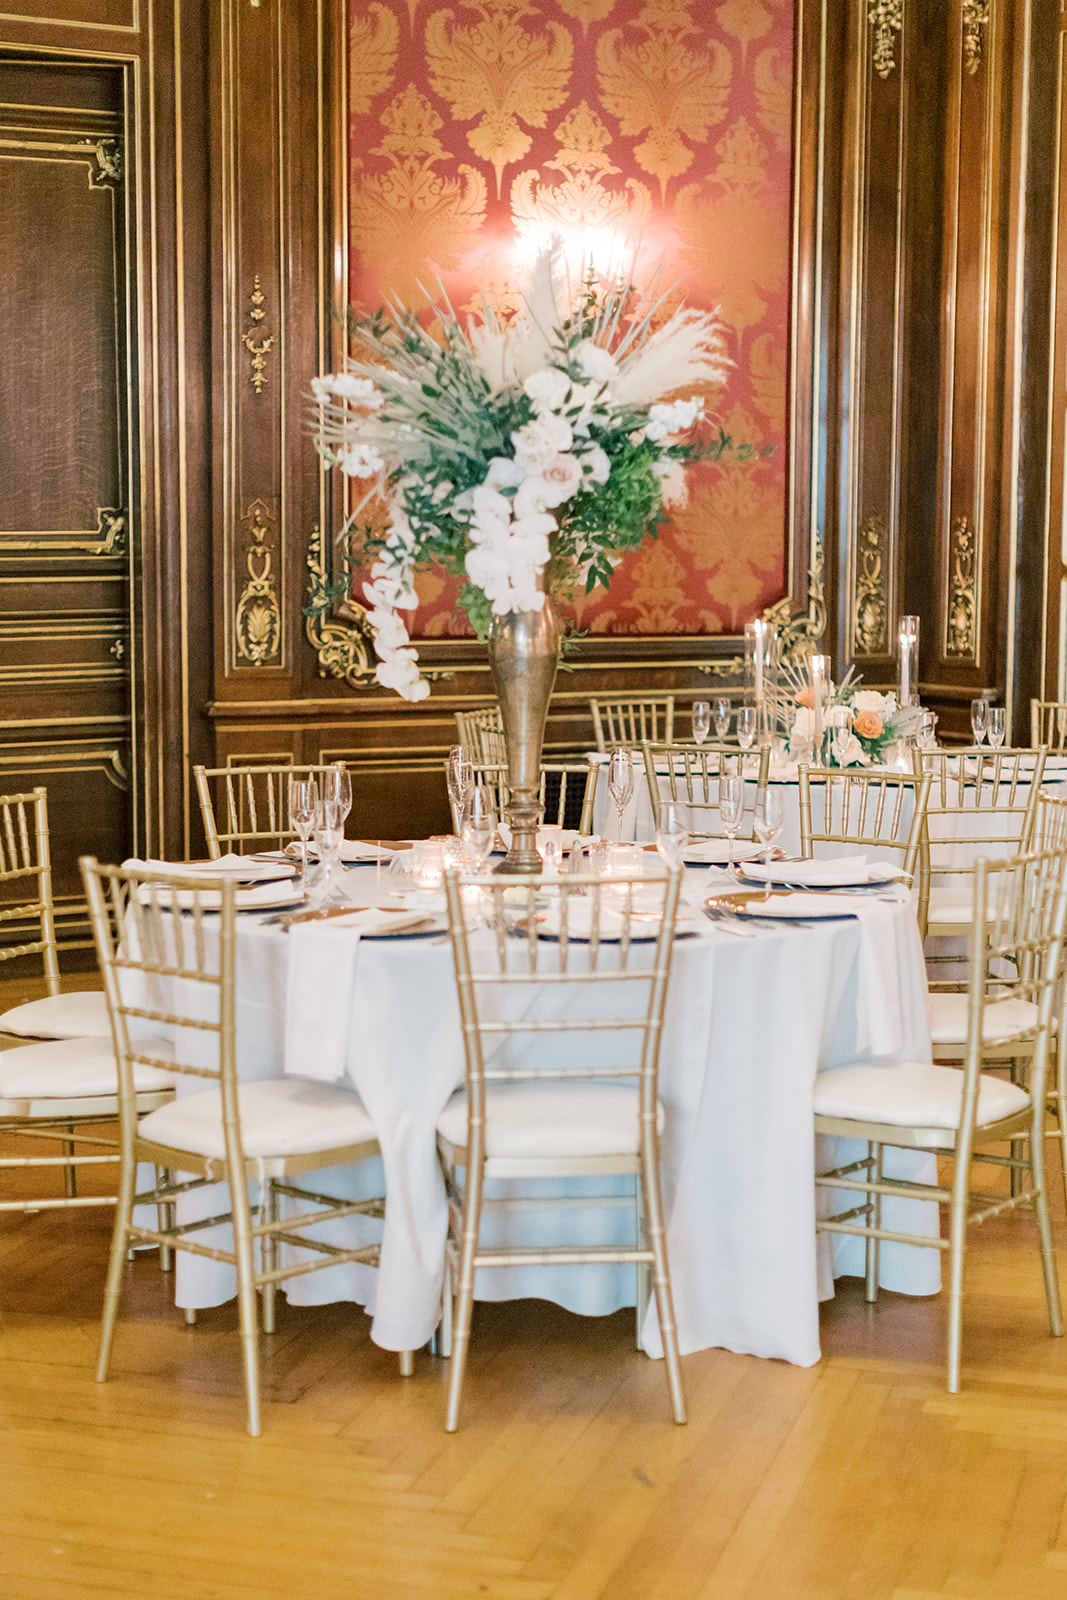 Table scape with white linen and gold chairs. 